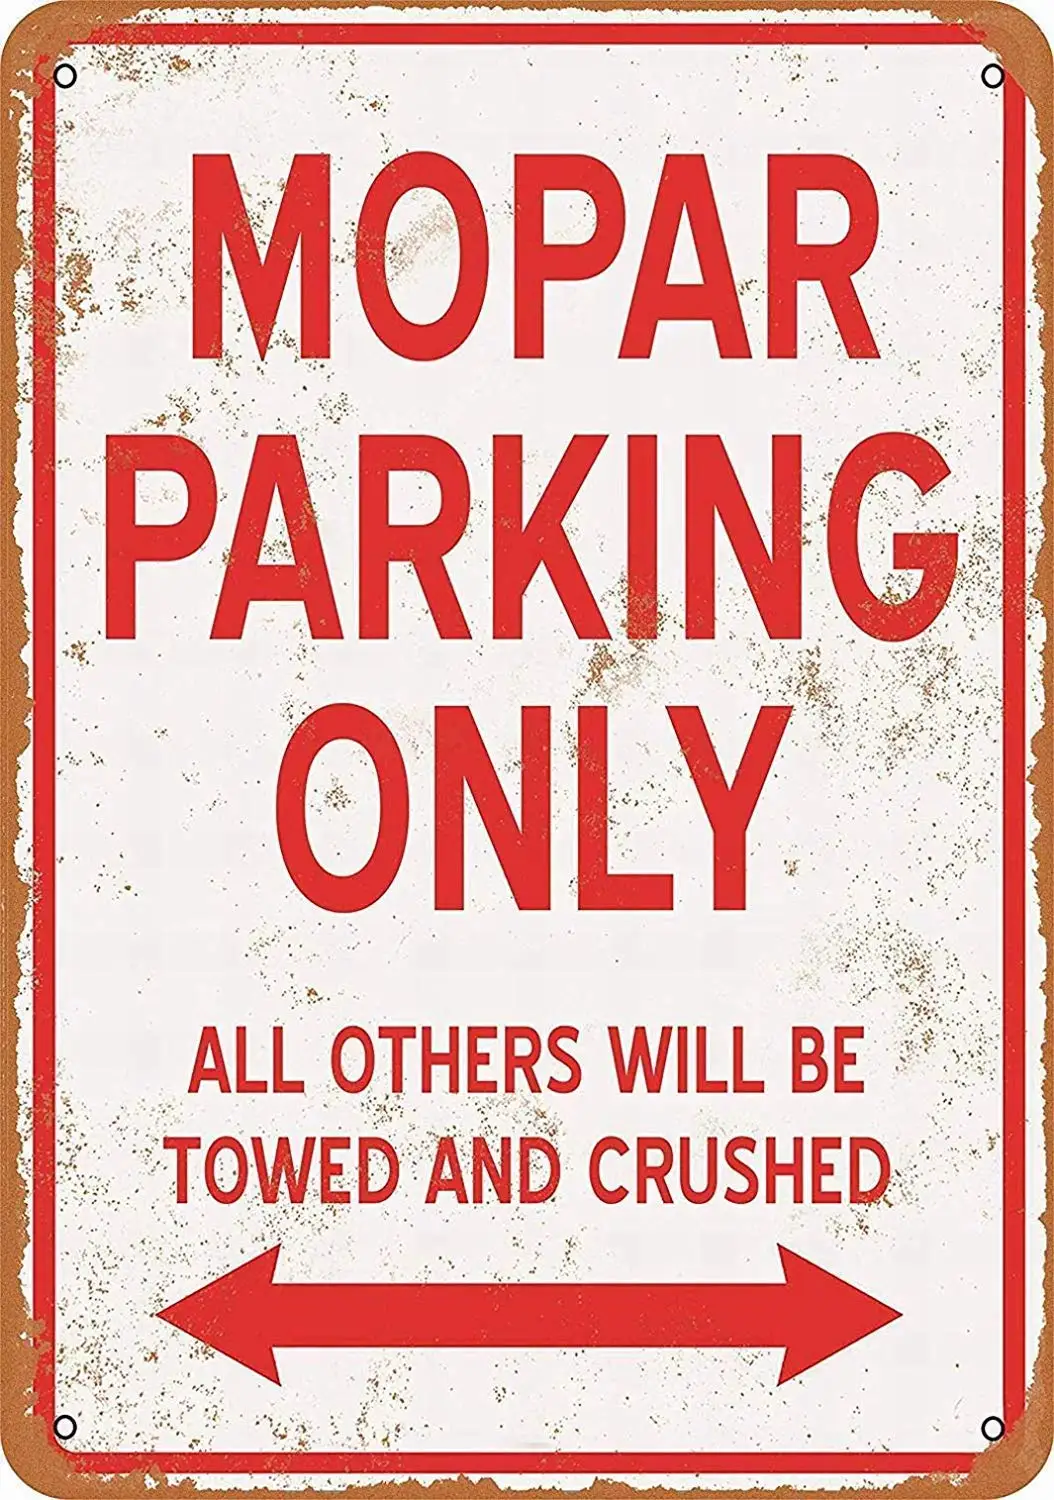 

Yard Sign Wall Decor 12x8inch,Mopar Parking ONLY,Iron Poster Painting Tin Sign Wall Decor for Cafe Bar Pub Home Beer Decoration